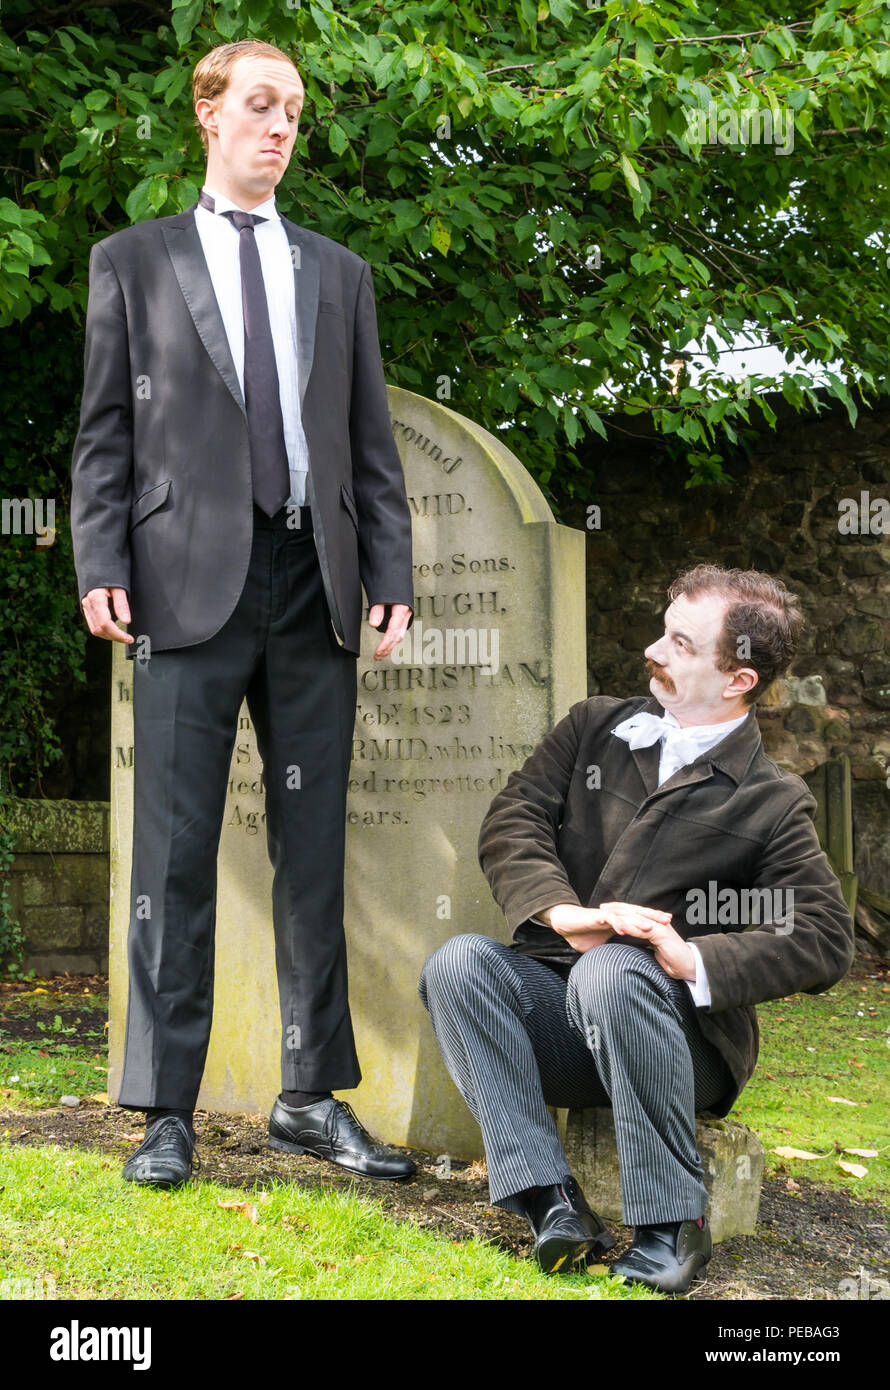 Edinburgh, Scotland, UK. 14th August 2018. Edinburgh Fringe Festival Canongate churchyard, Edinburgh, Scotland, United Kingdom. Winners of Show of the Week Award at VAULT Festival 2018, Dominic Allen and Simon Maeder present Providence, a dark comedy about the life and works of America’s horror writer, HP Lovecraft by Turnpike Productions. Simon Maeder plays HP Lovecraft and Dominic Allen plays Edgar Allan Poe Stock Photo